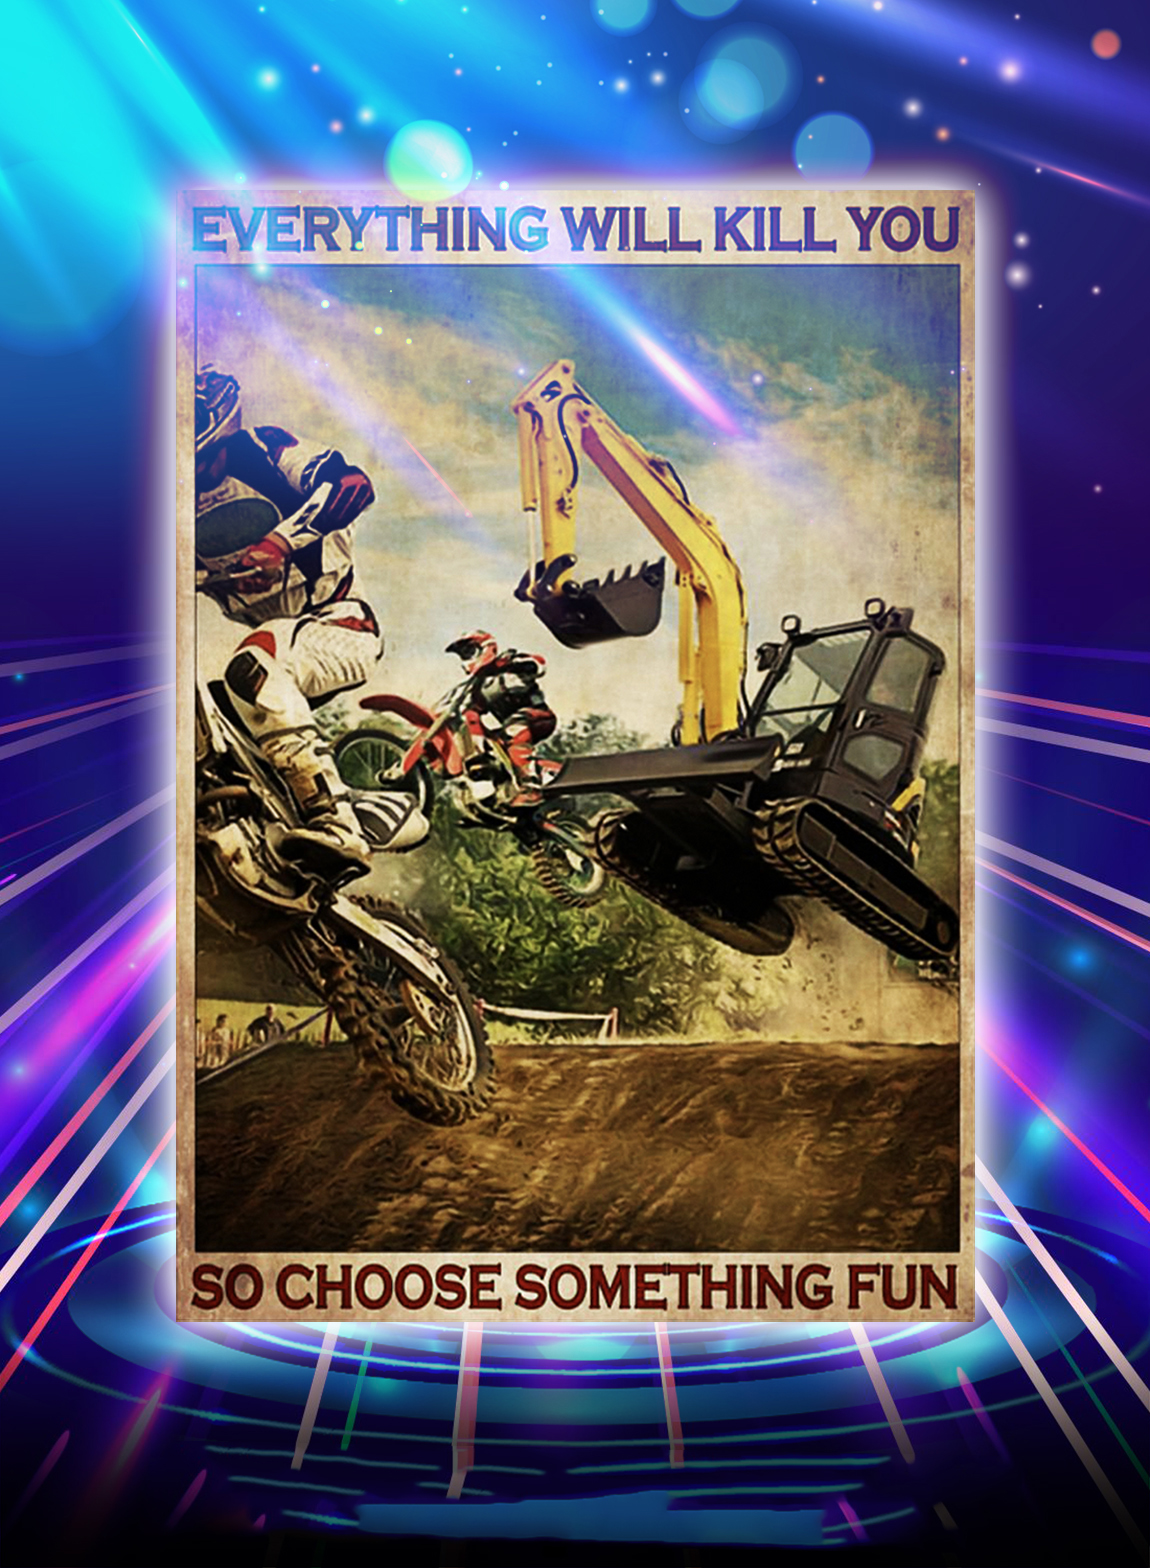 Motocross and excavator everything will kill you so choose something fun poster - A3